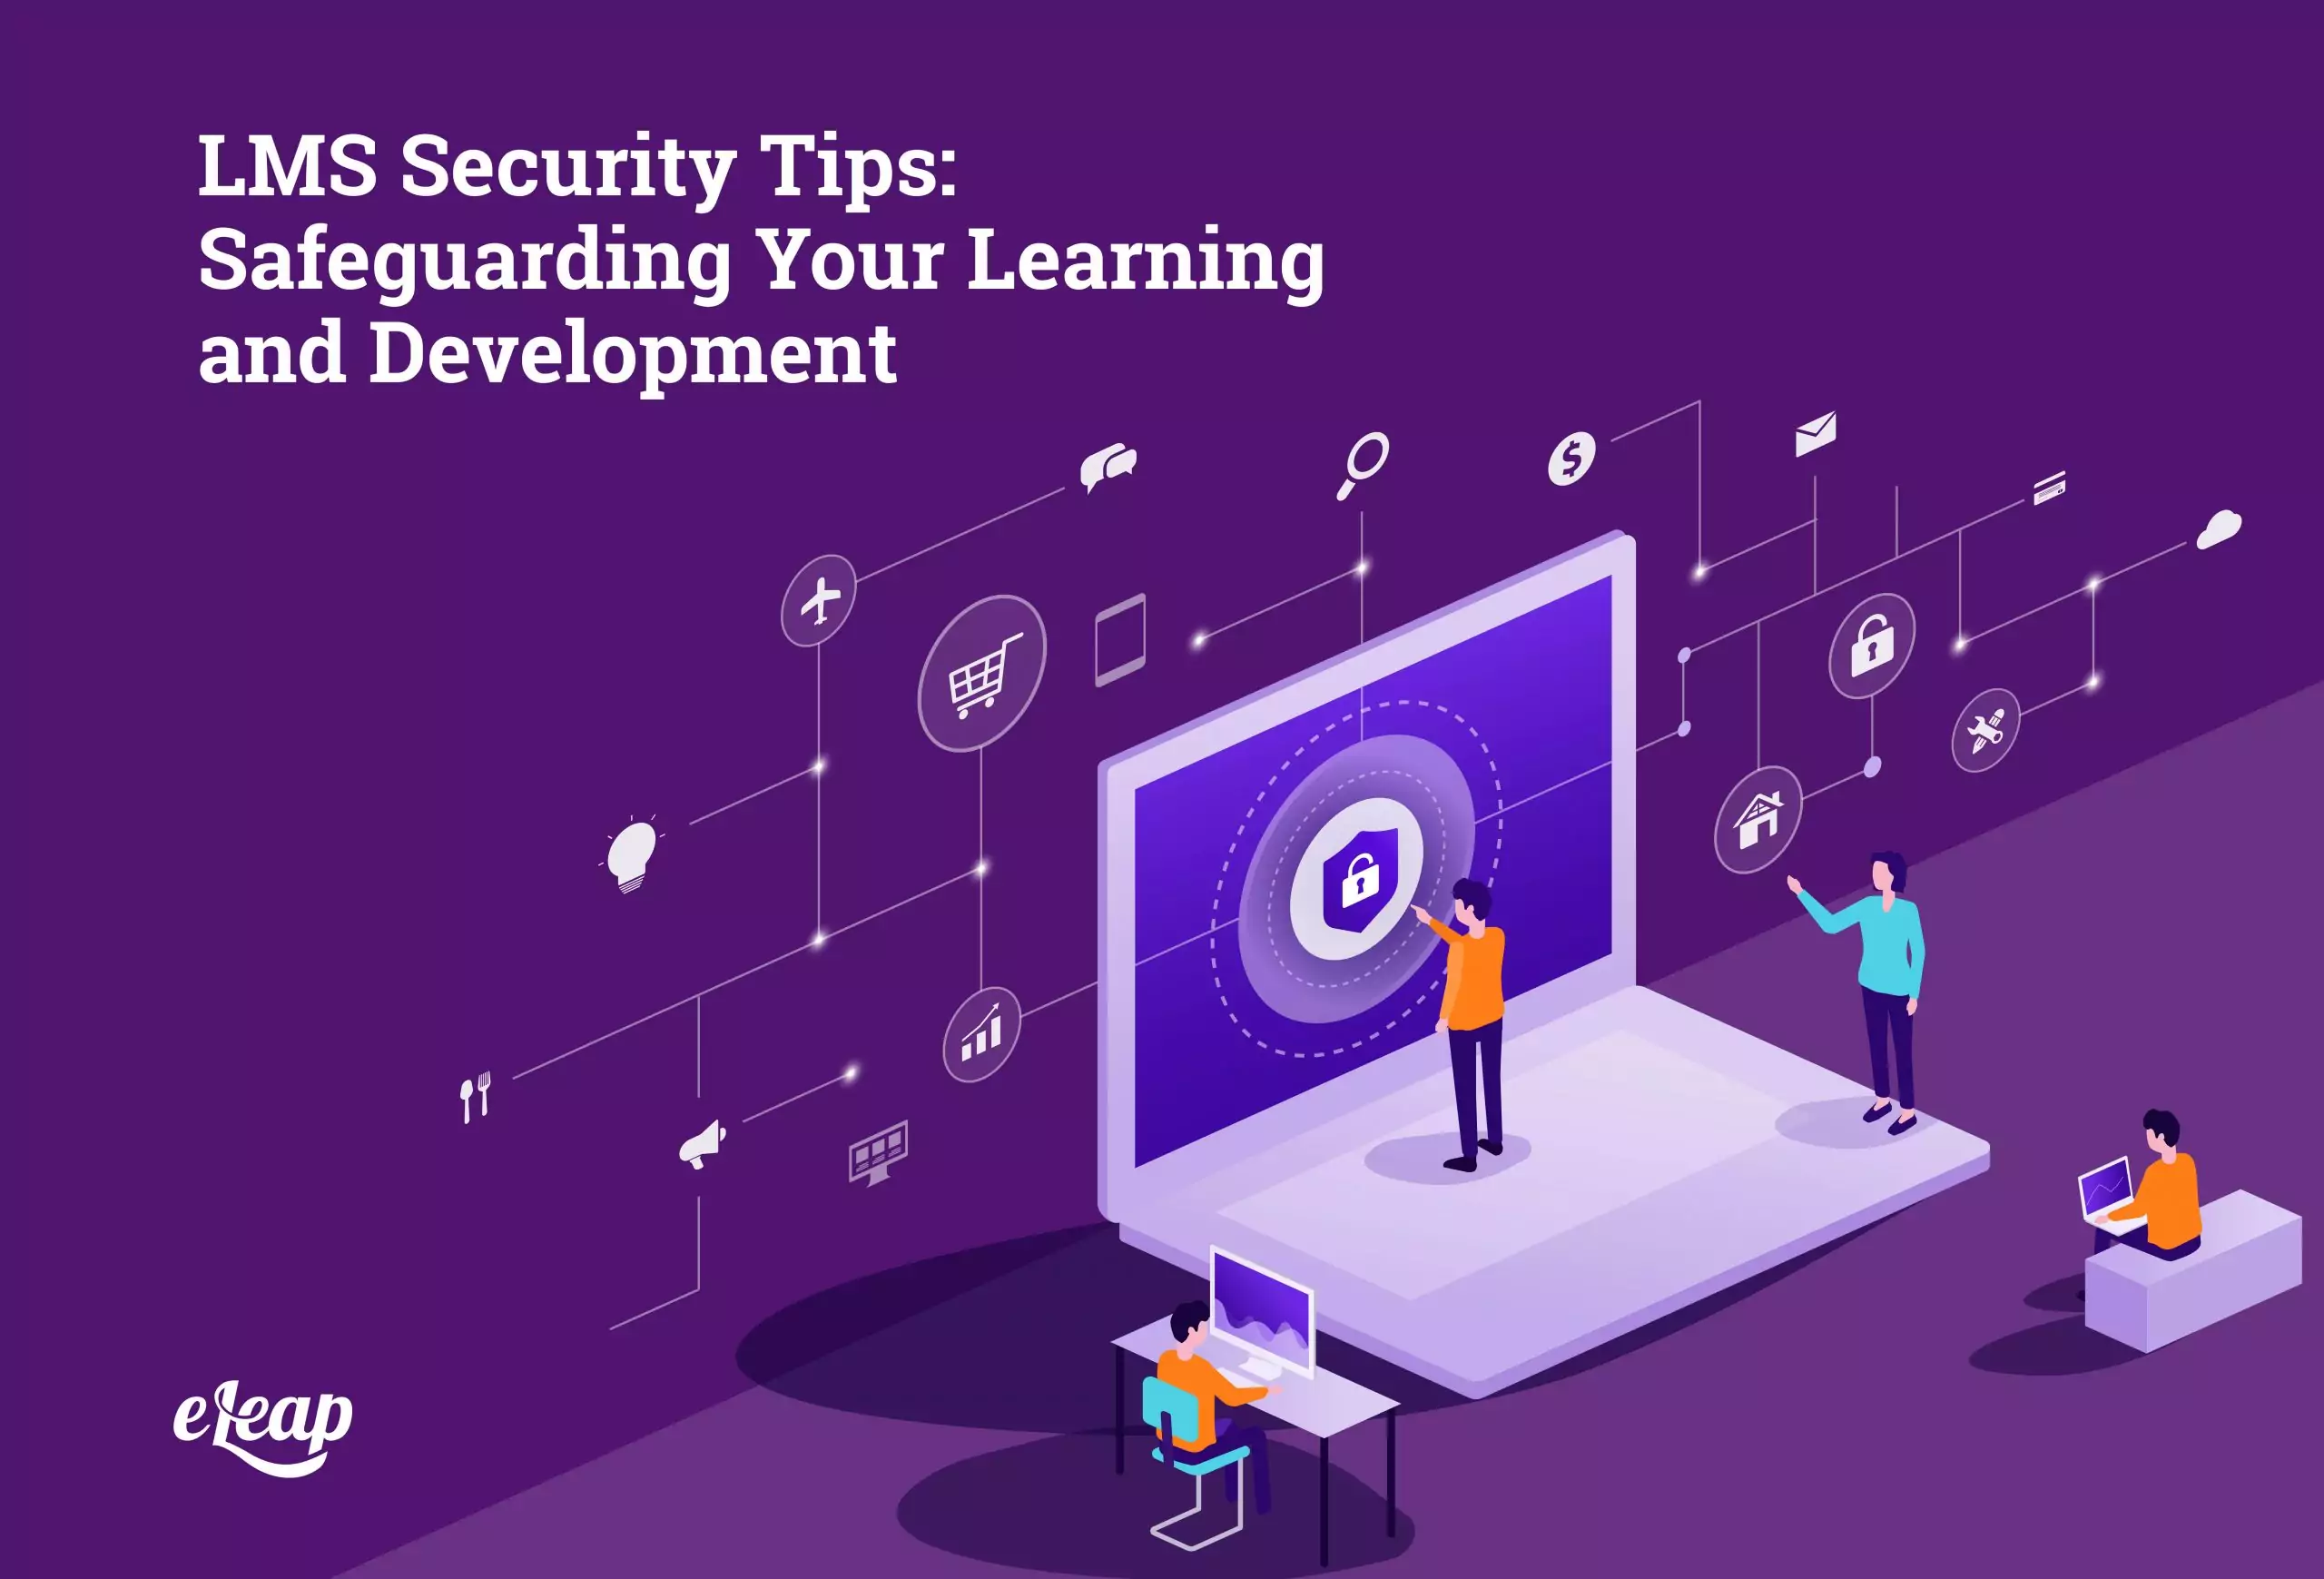 LMS Security Tips: Safeguarding Your Learning and Development